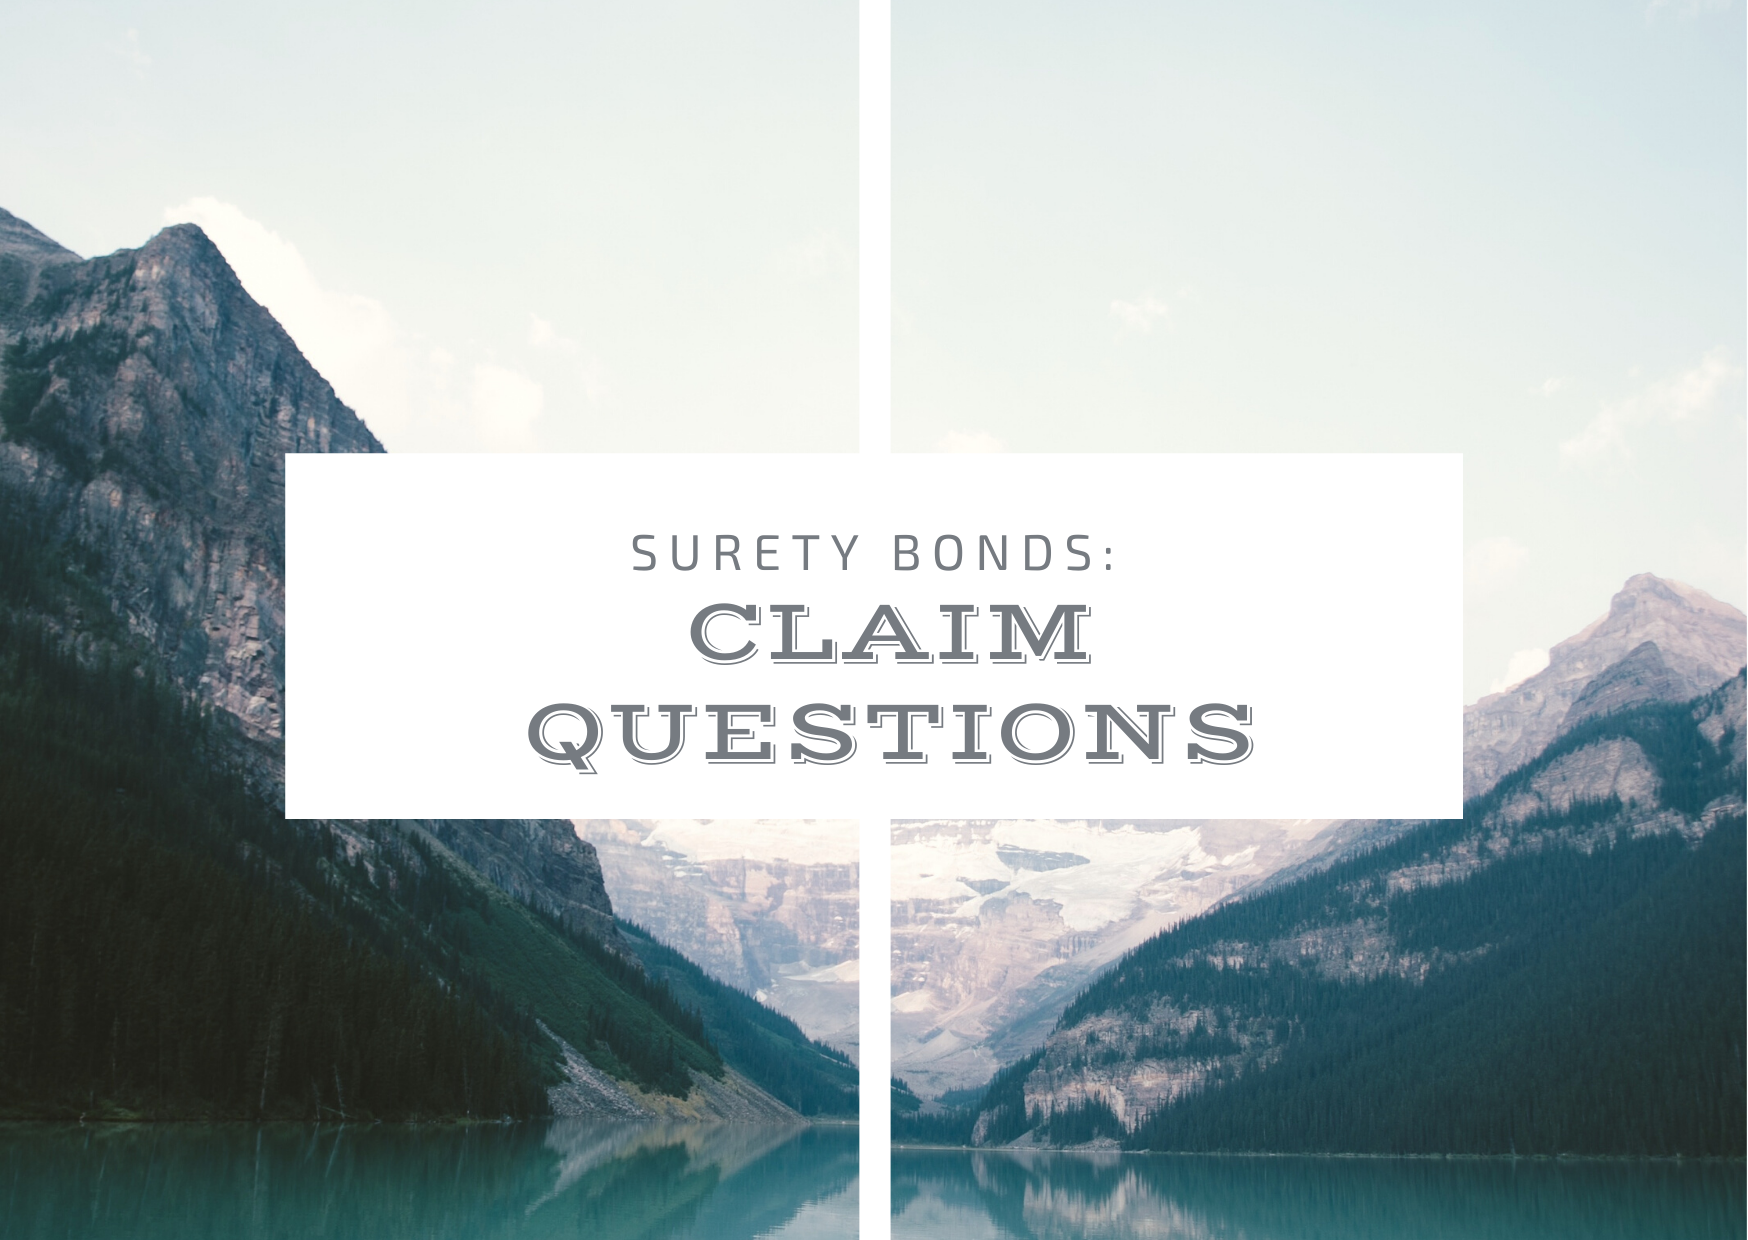 surety bond - what happens if a claim is filed against my bond - nature